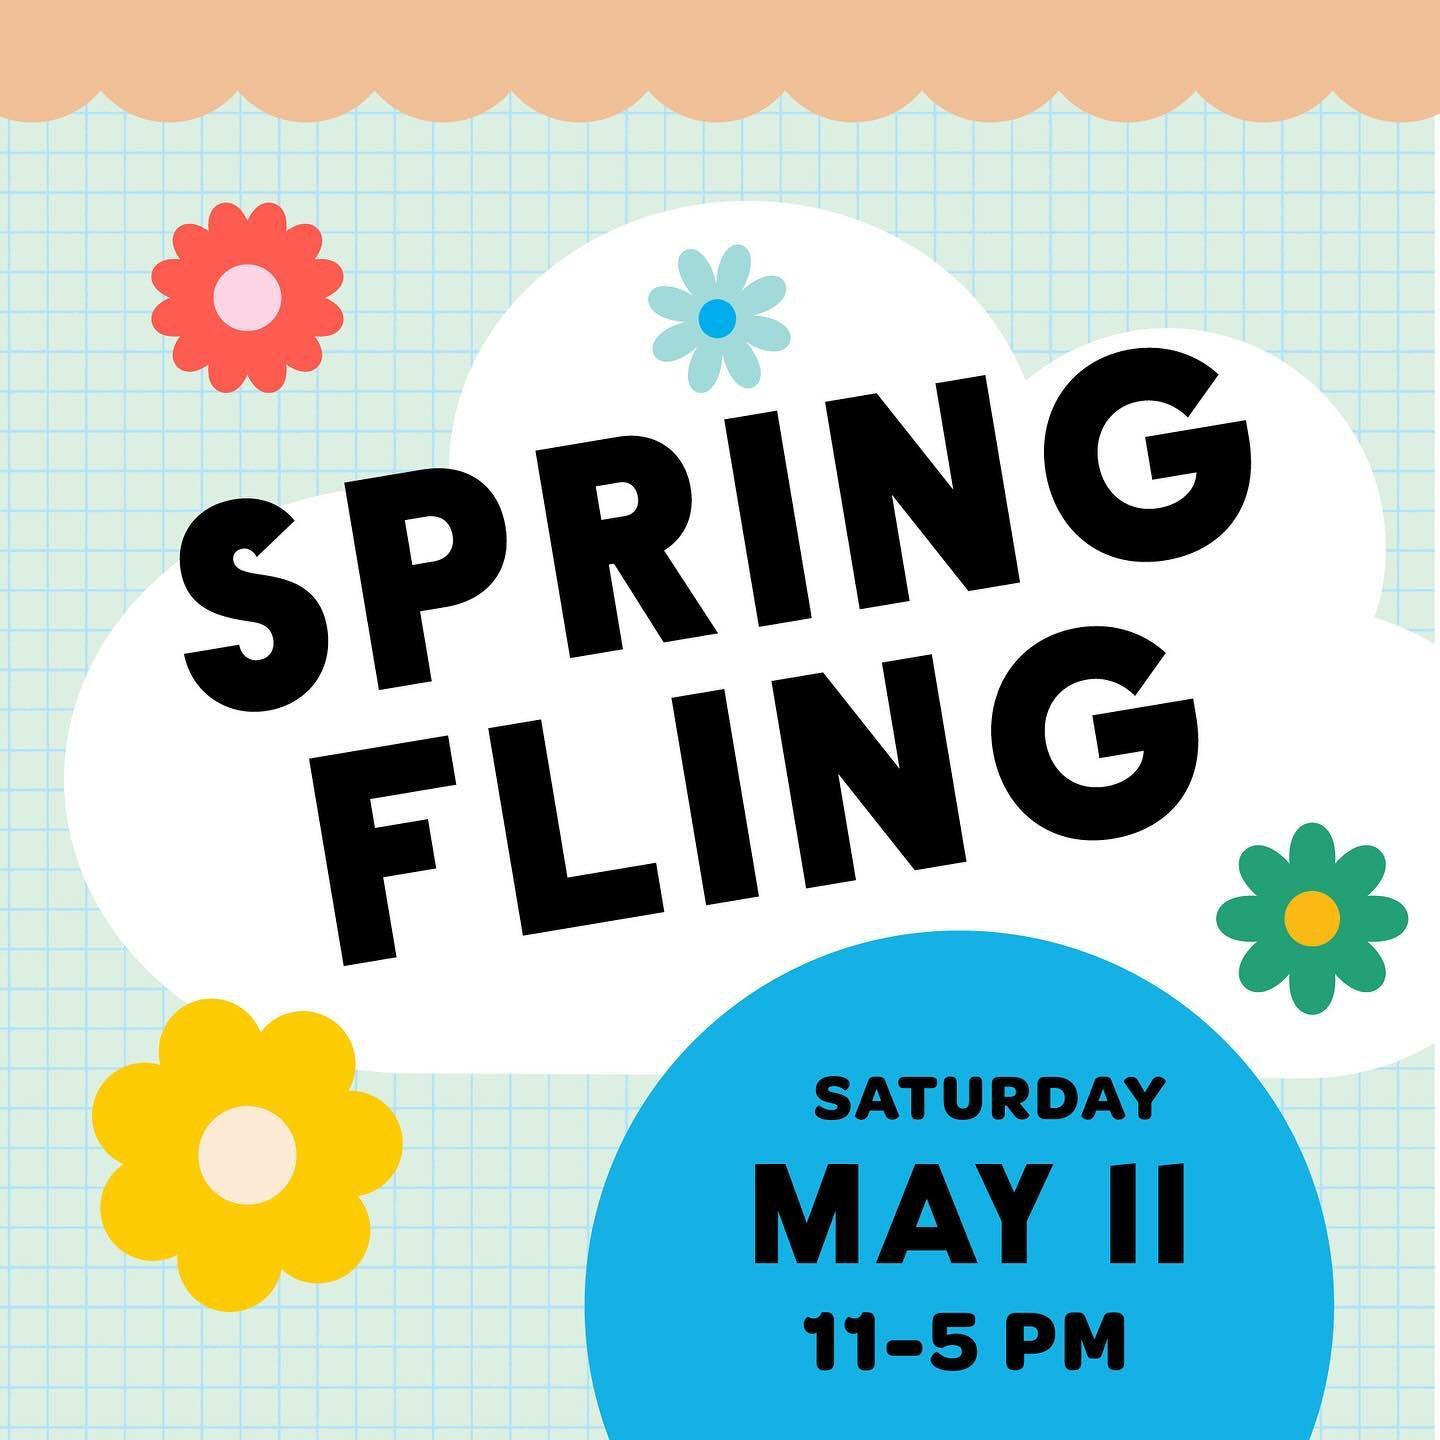 Hey Friends &amp; Neighbors, join us this Saturday for a Spring Fling event on Selby &amp; Snelling Ave. Lots of fun, goodies and sales from local businesses. Plus a BIG raffle prize!
We&rsquo;ll be open 9am-4pm with special treats from @anniebscandy